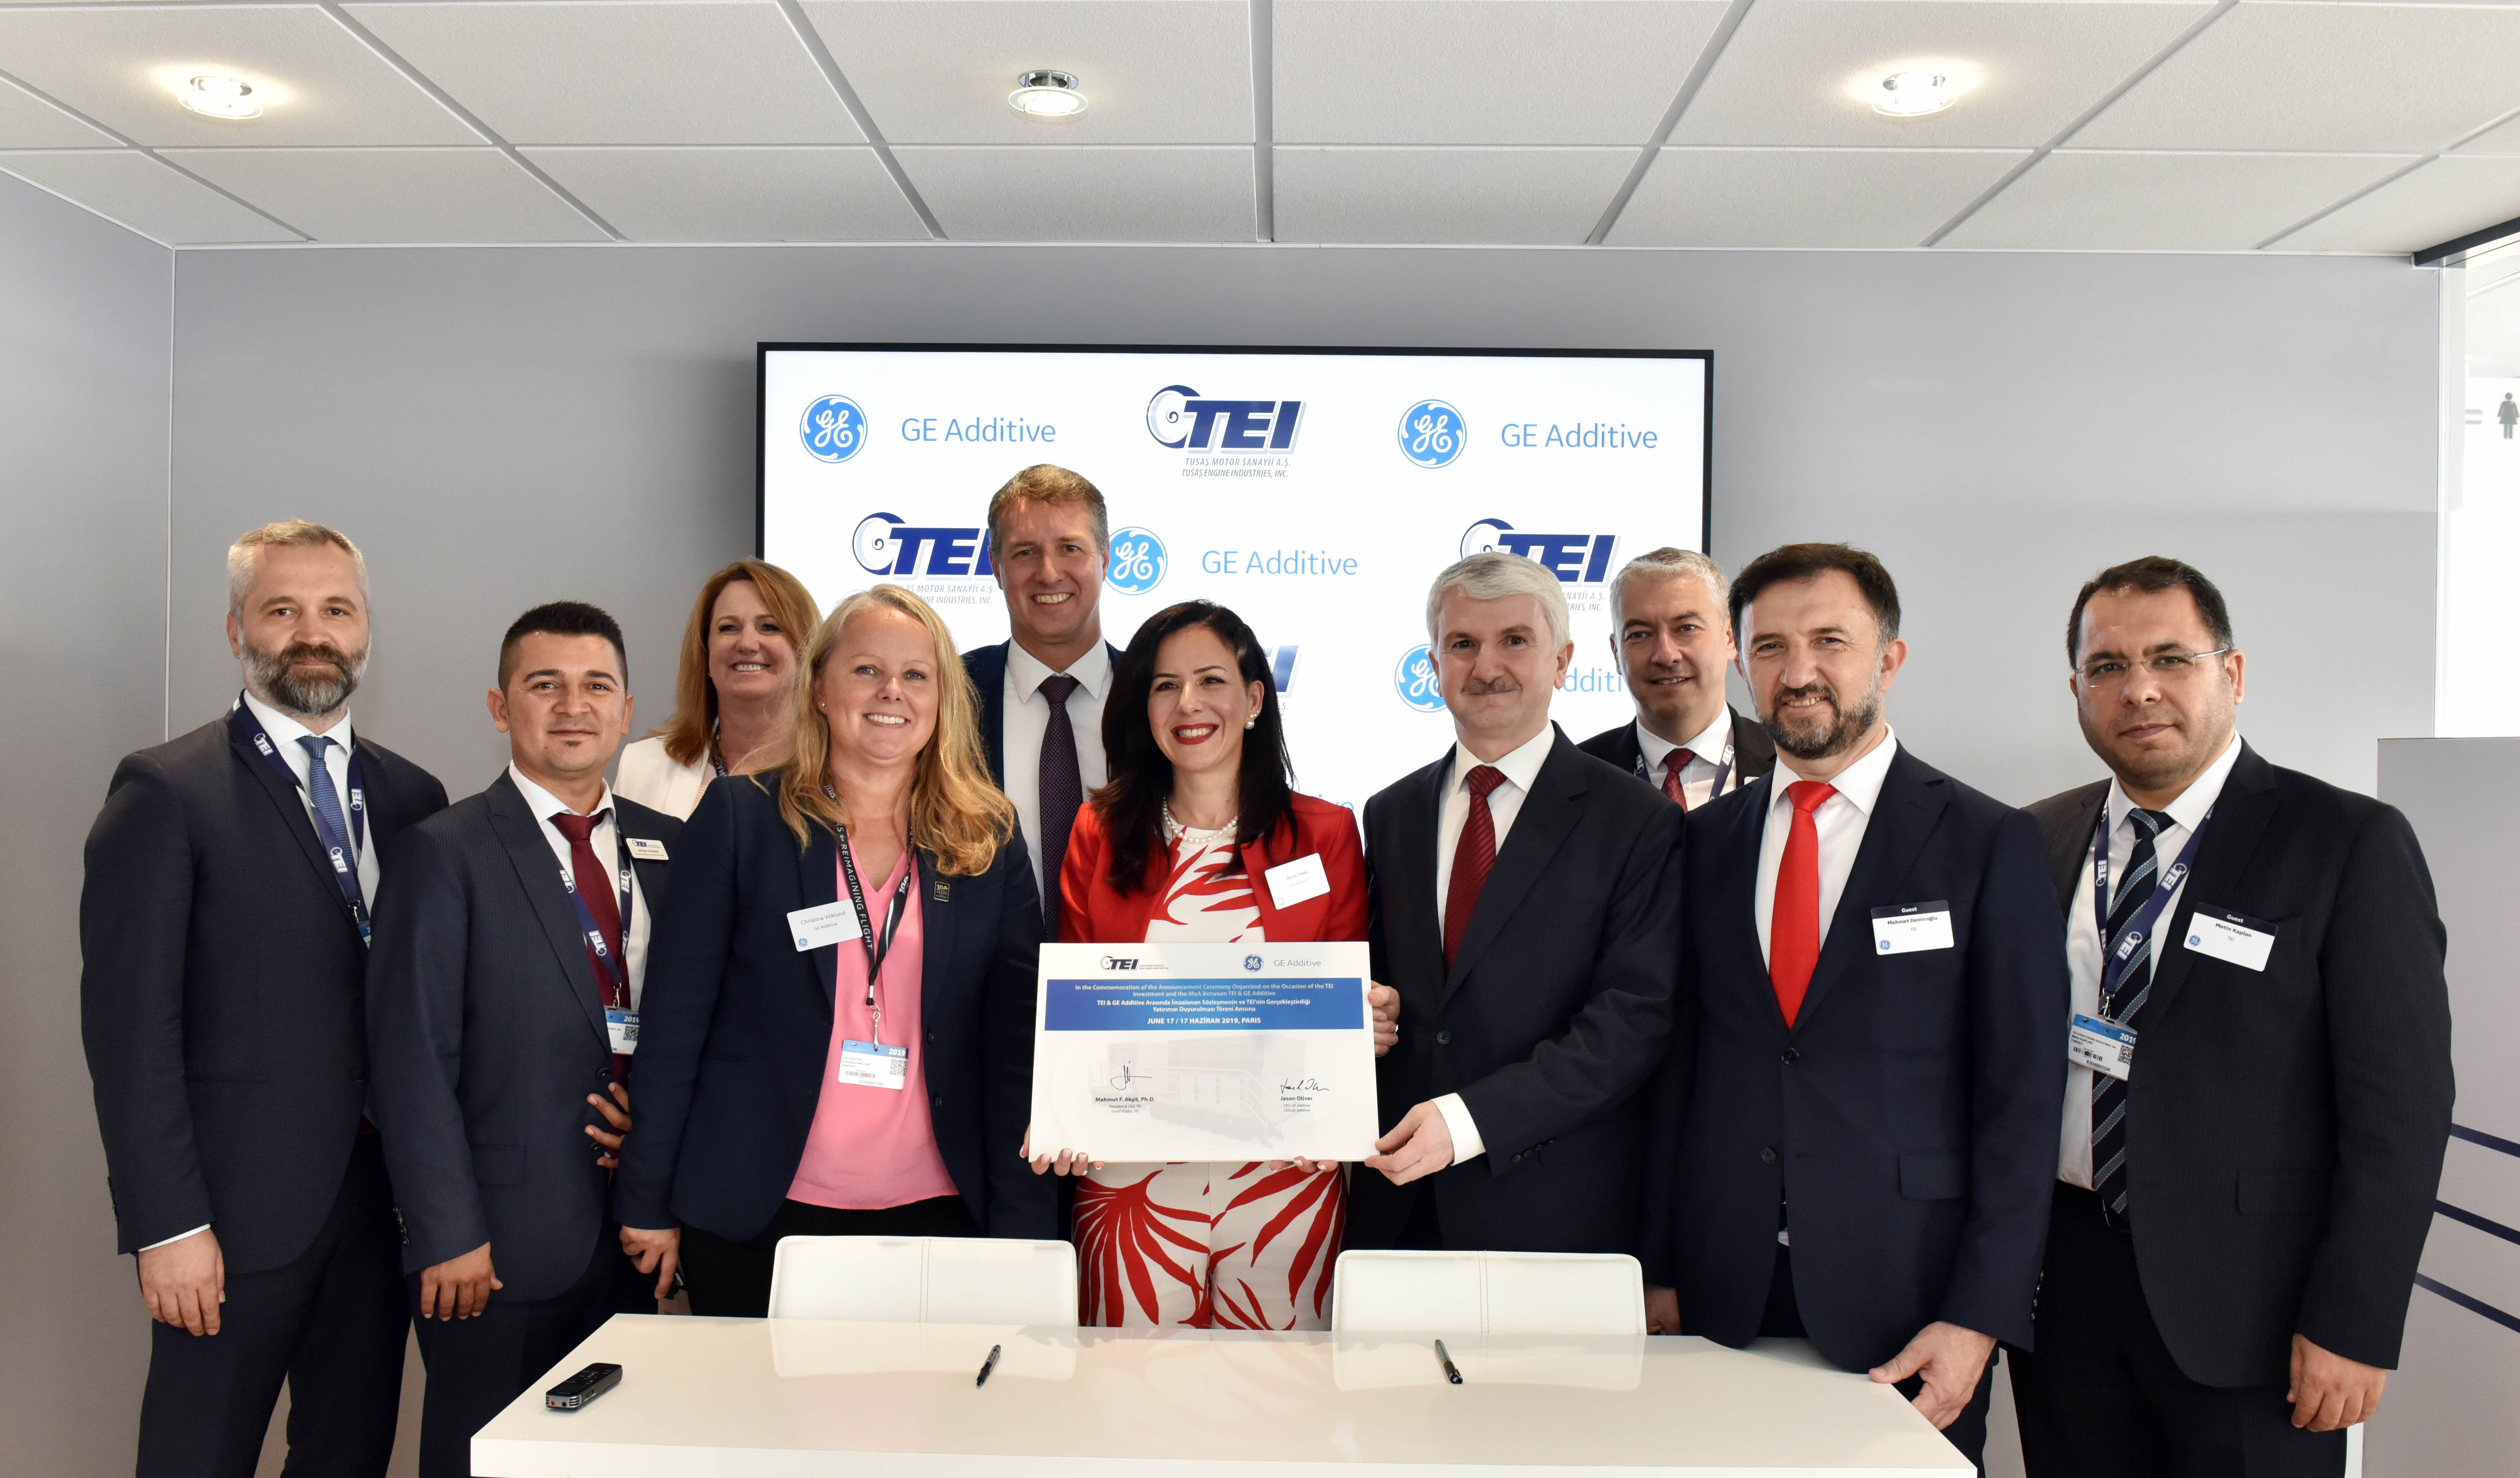 GE Additive and TEI signing ceremony at Paris Air Show 2019. Photo via GE Additive.